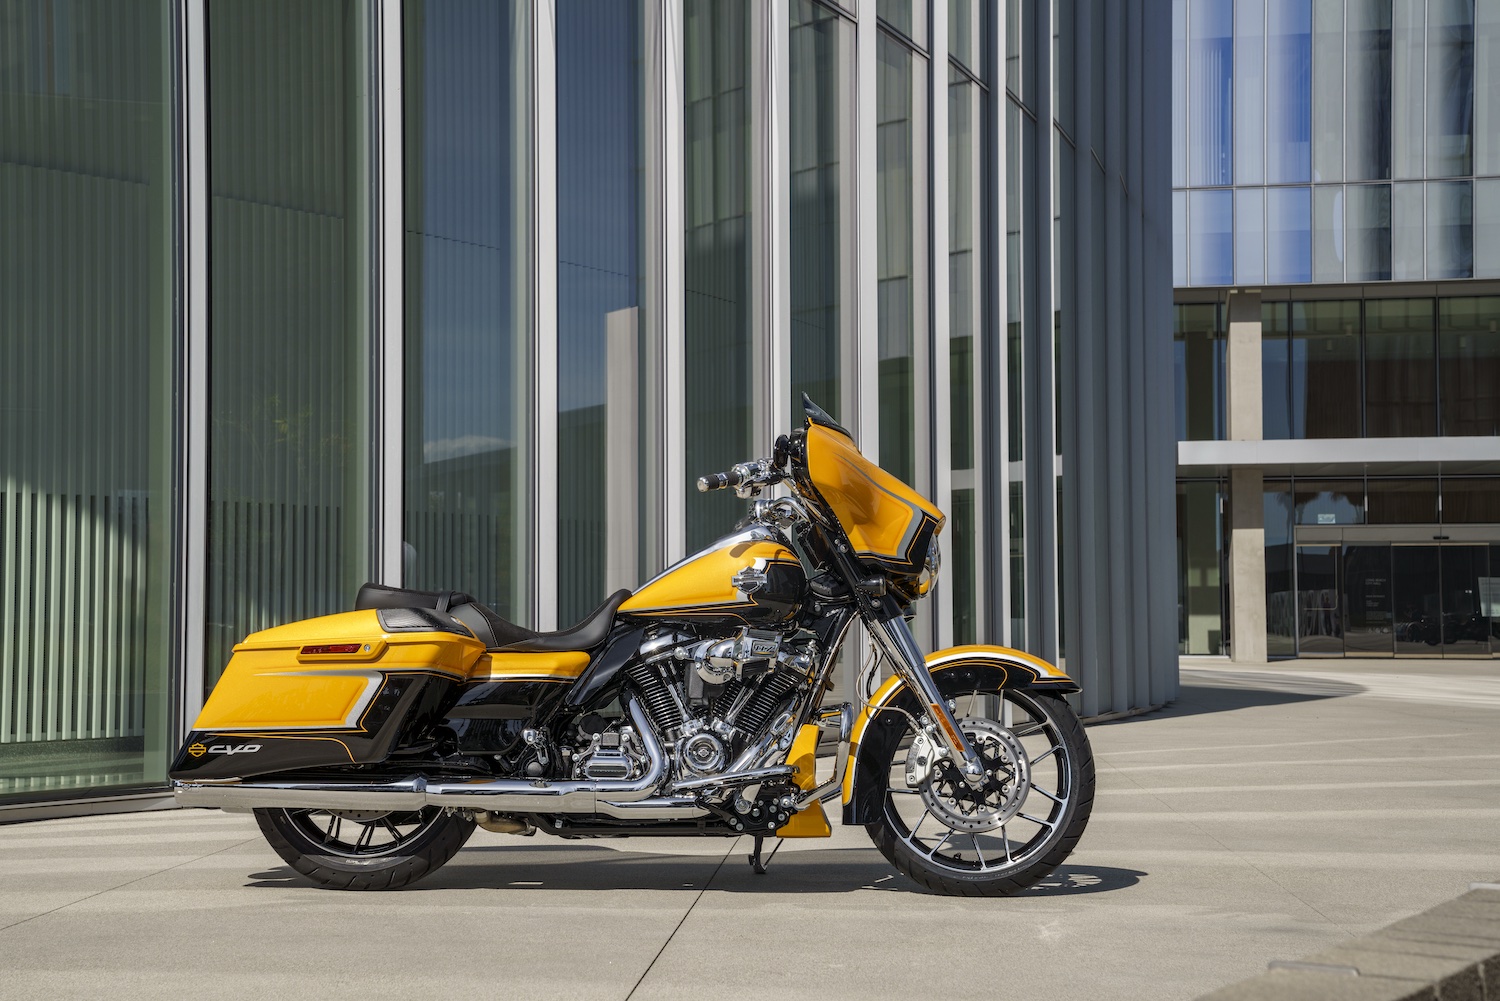 A view of the new bikes available from Harley-Davidson, including new CVO models